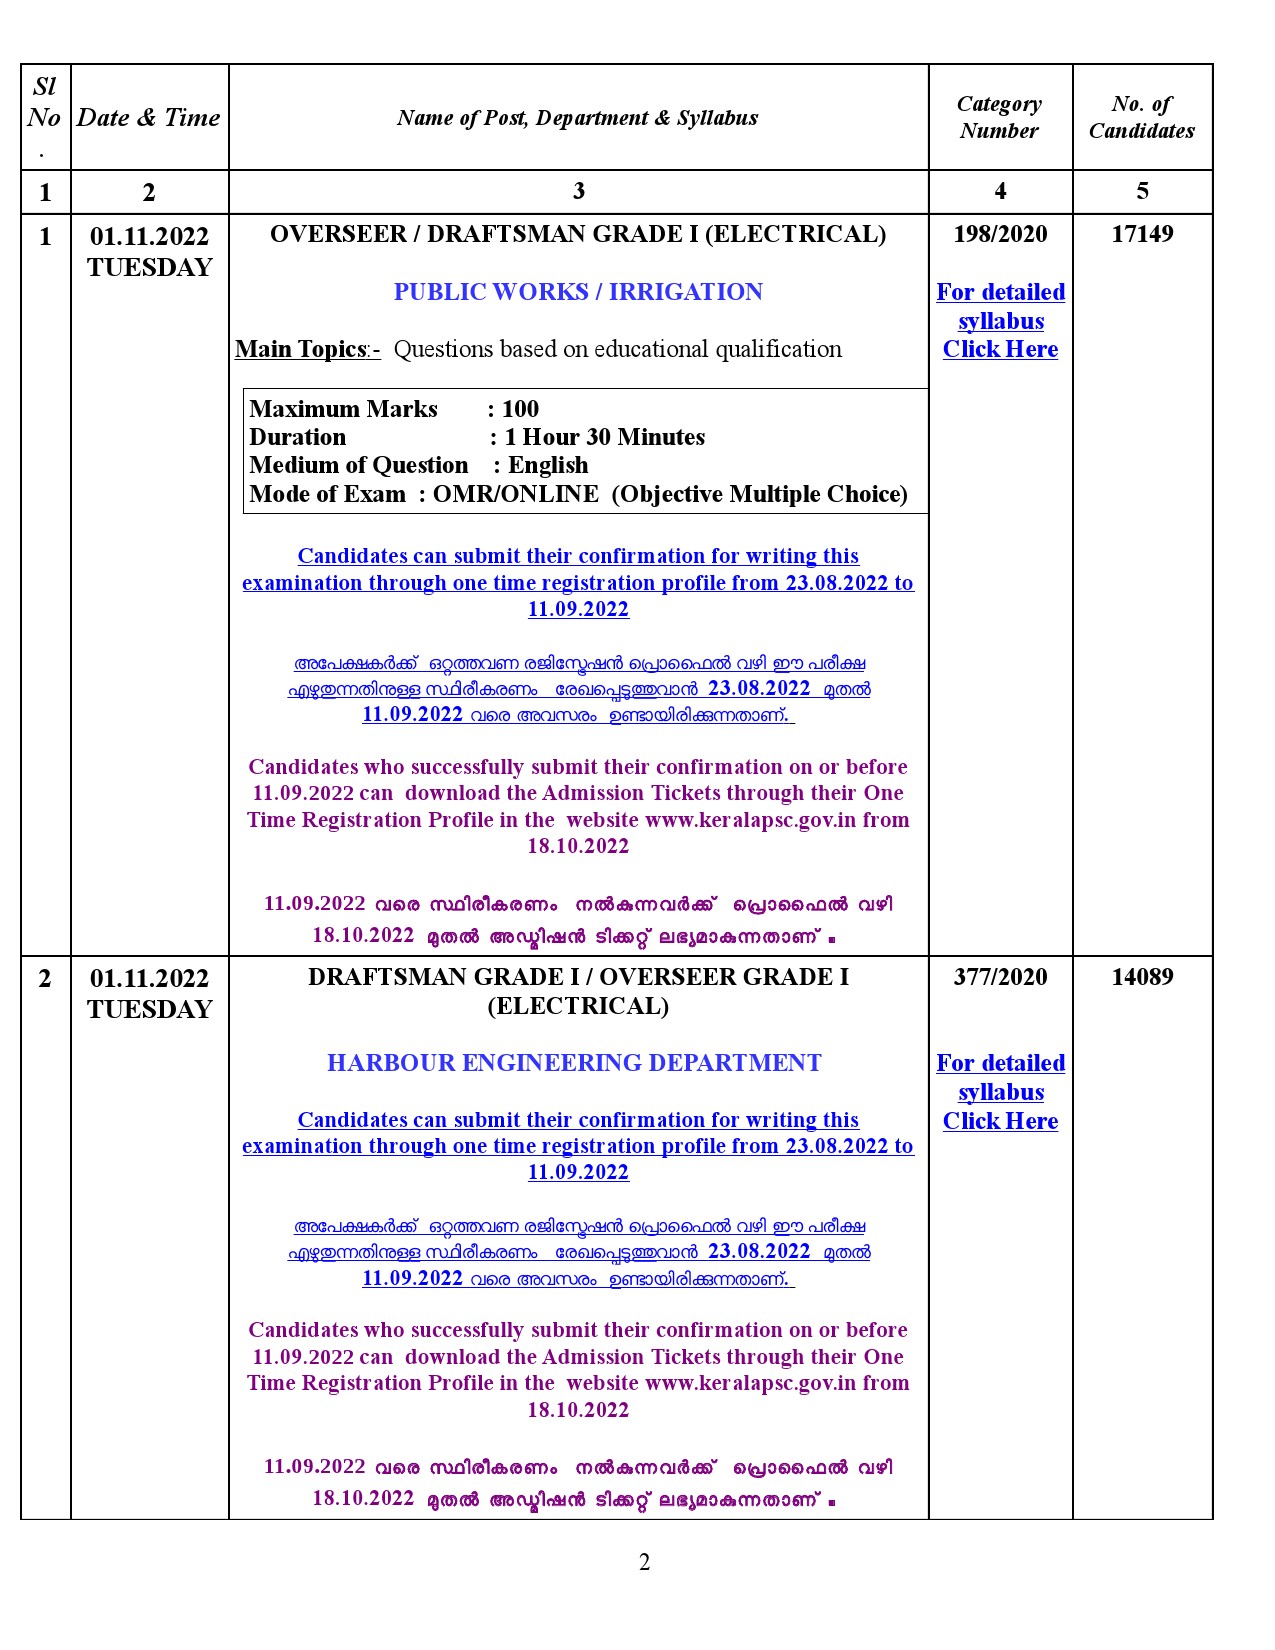 Examination Programme For The Month Of November 2022 - Notification Image 2